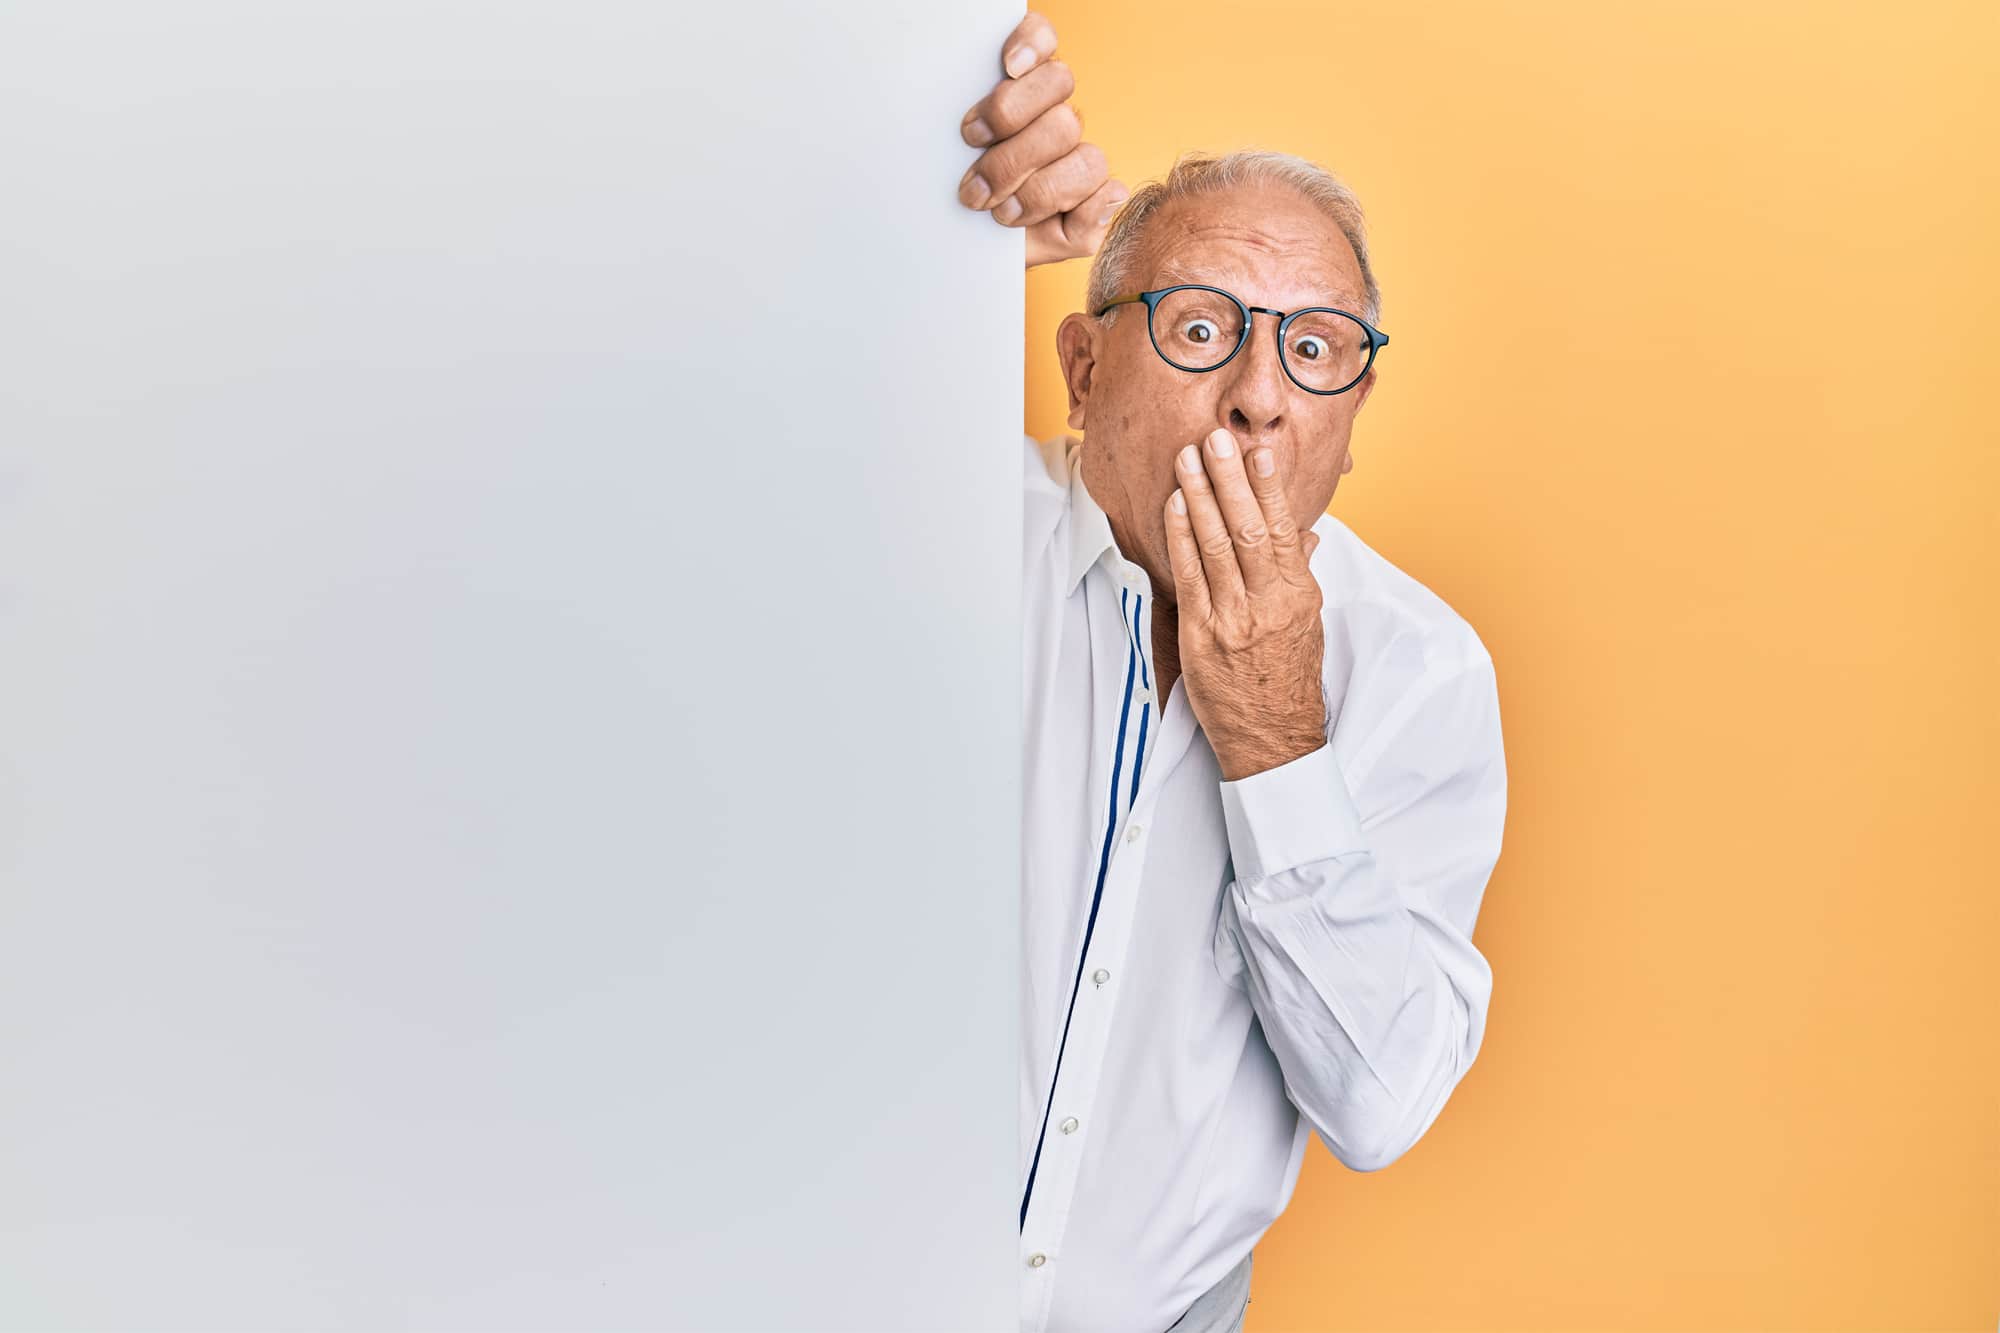 Old man with a "whoops" face to illustrate mistakes with freelance clients